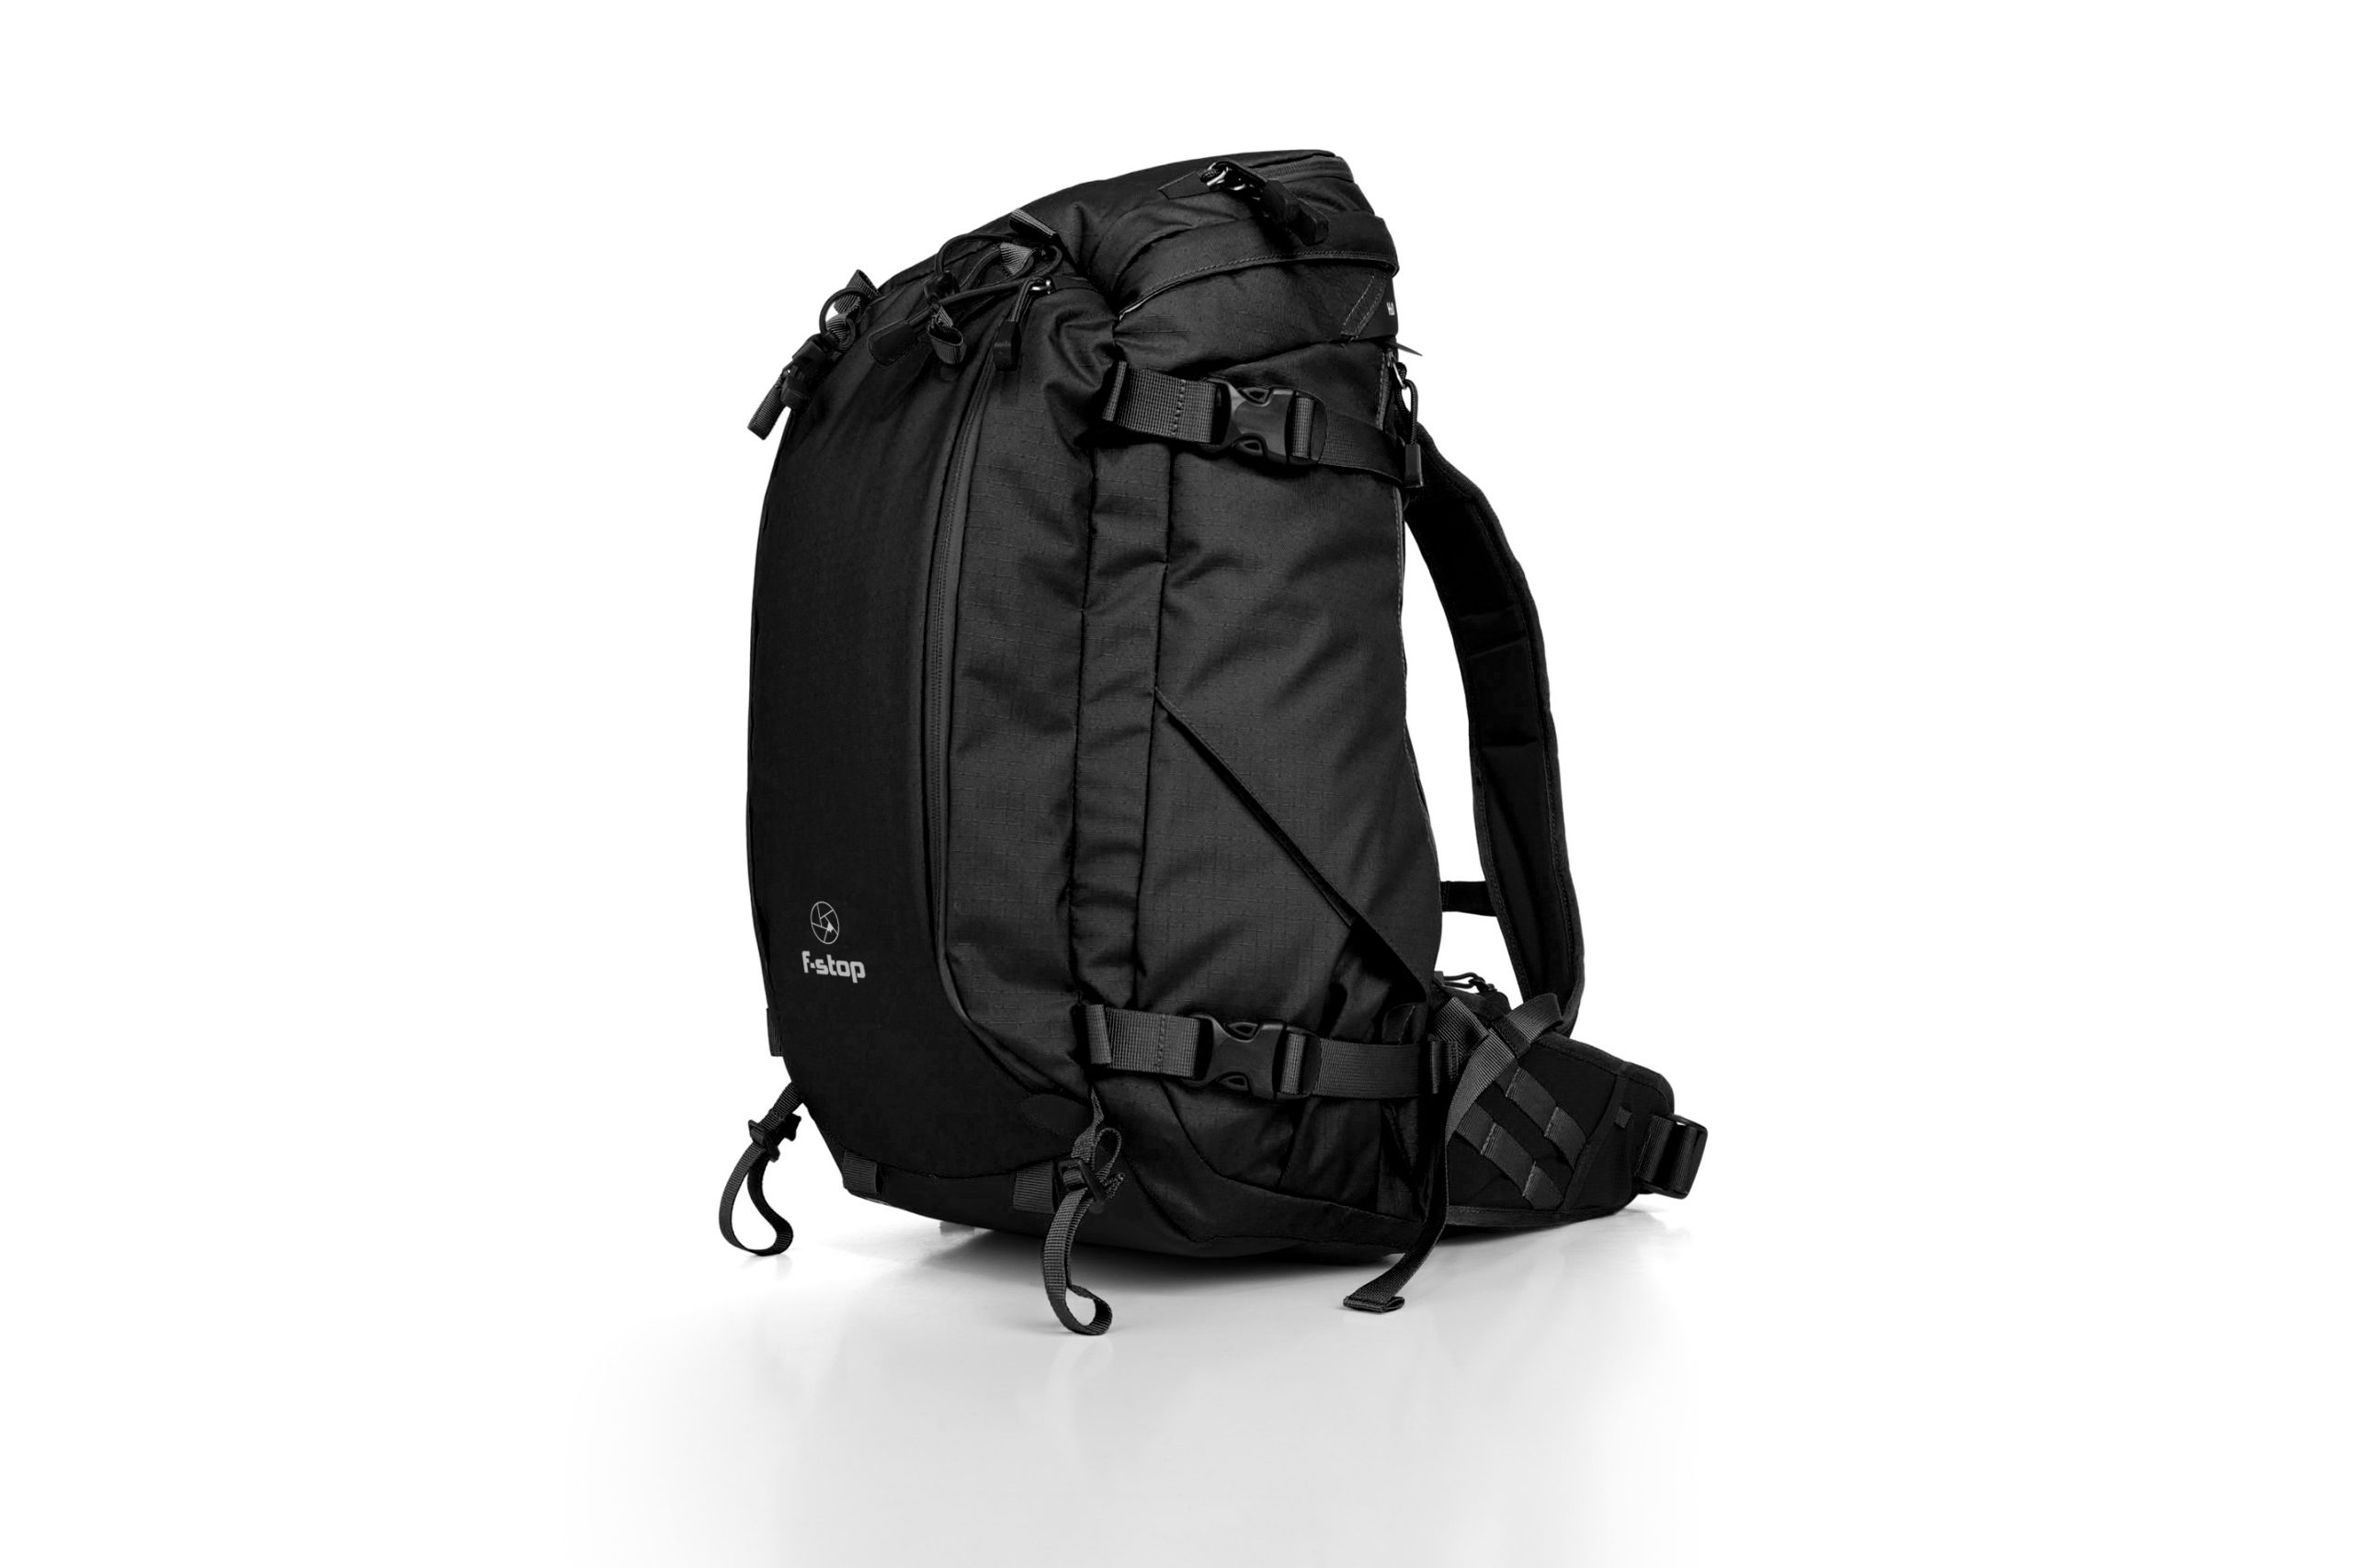 Lotus 32L Adventure and Travel Camera Backpack - f-stop Gear